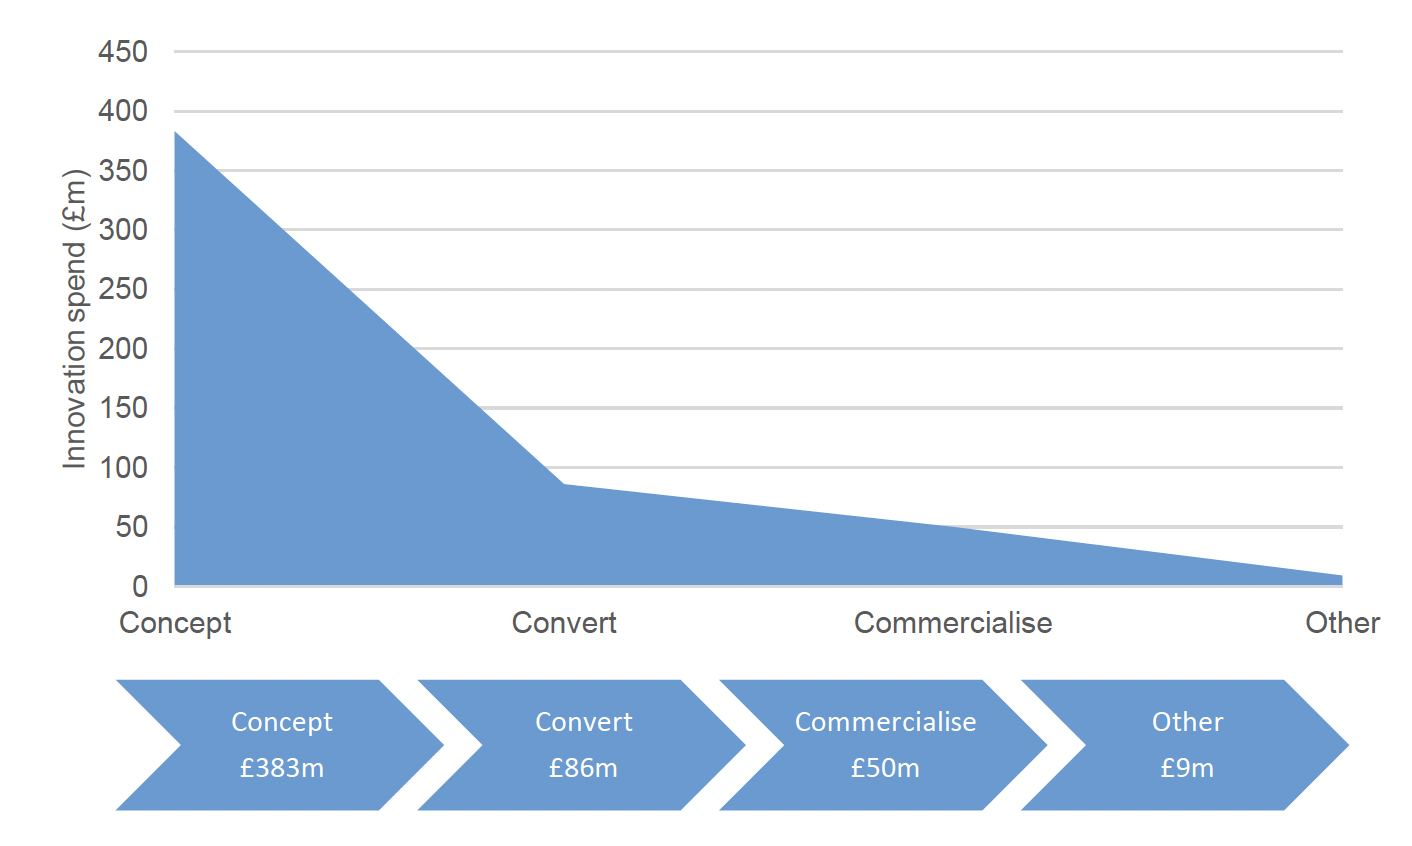 figure 1 shows innovation spend by the scottish government and it's agencies over the 4 stages of the innovation pipeline. The 'concept stage' receives far more funding than any other stage, with the trend falling off the closer to commercialise the spend becomes.